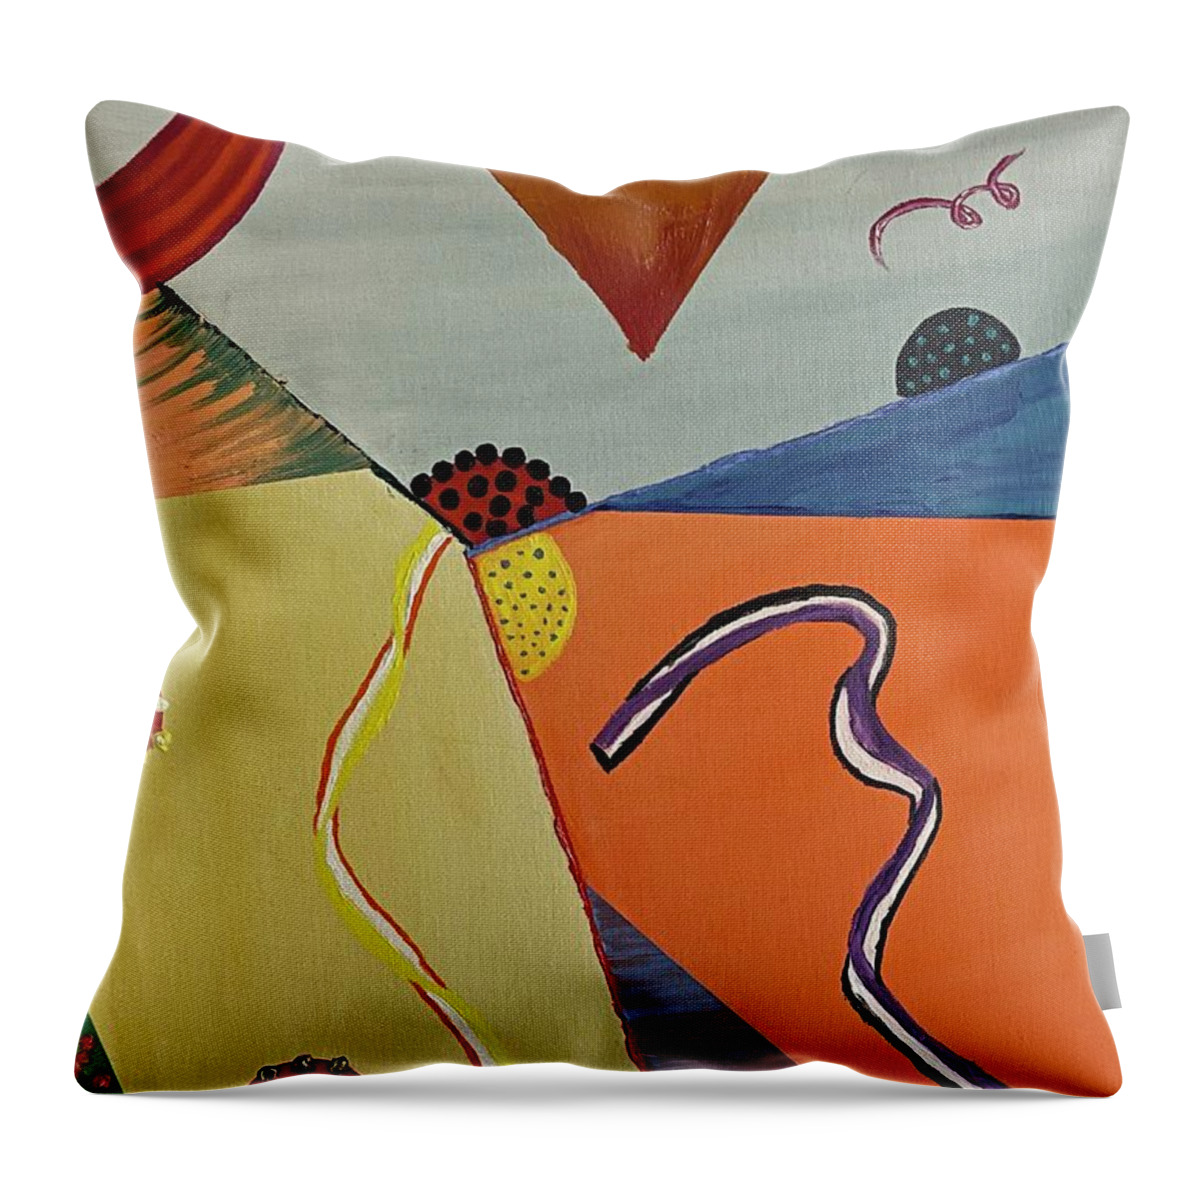 Abstract Throw Pillow featuring the painting Lines and Circles by Lisa White